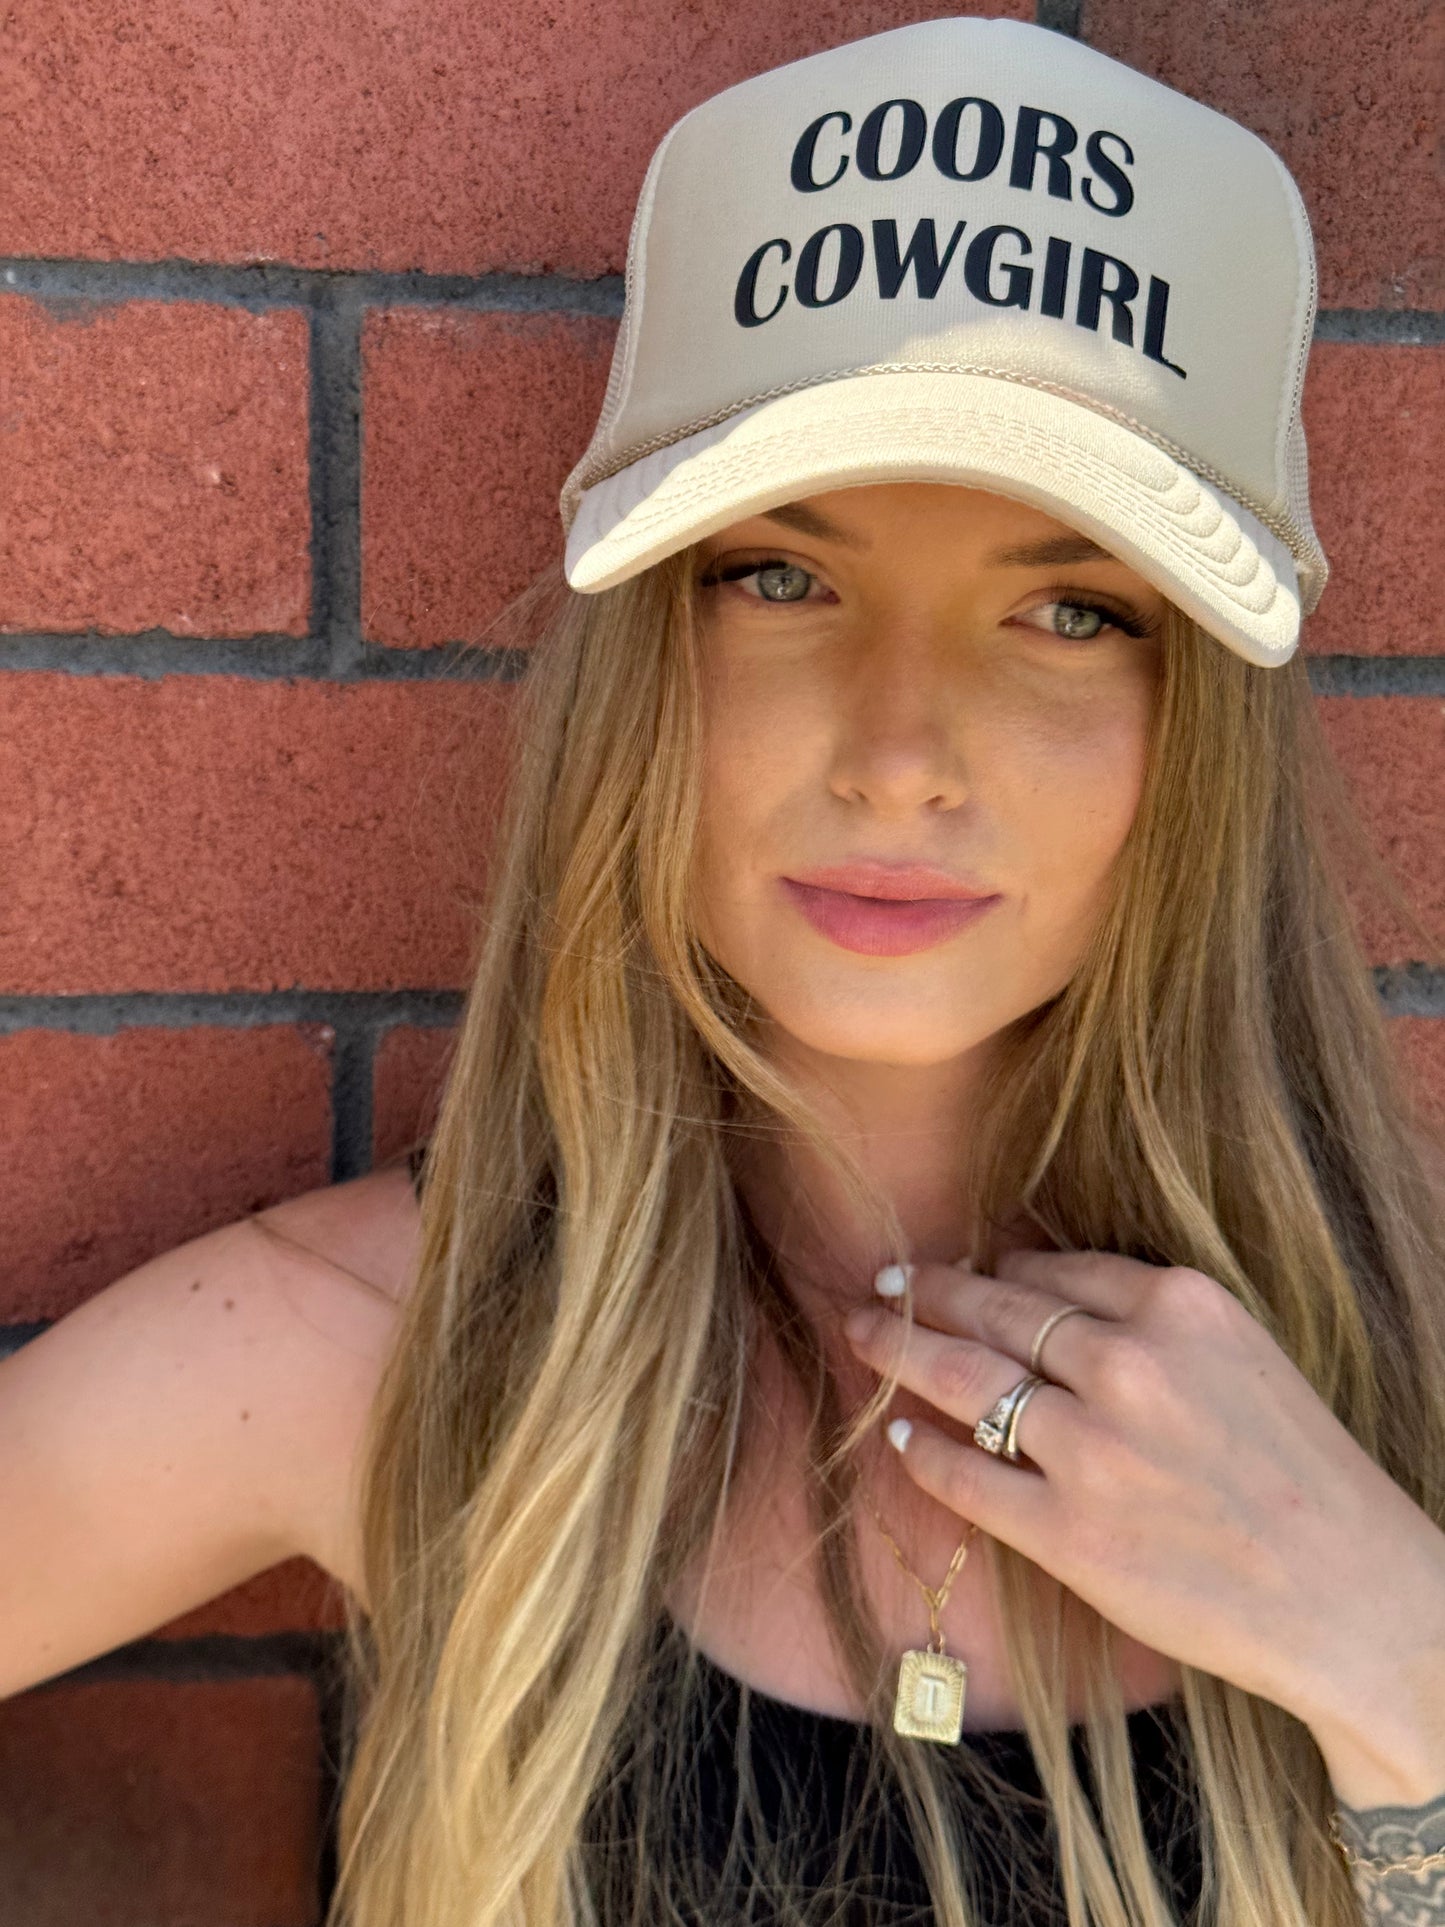 Coors Cowgirl Trucker Hat